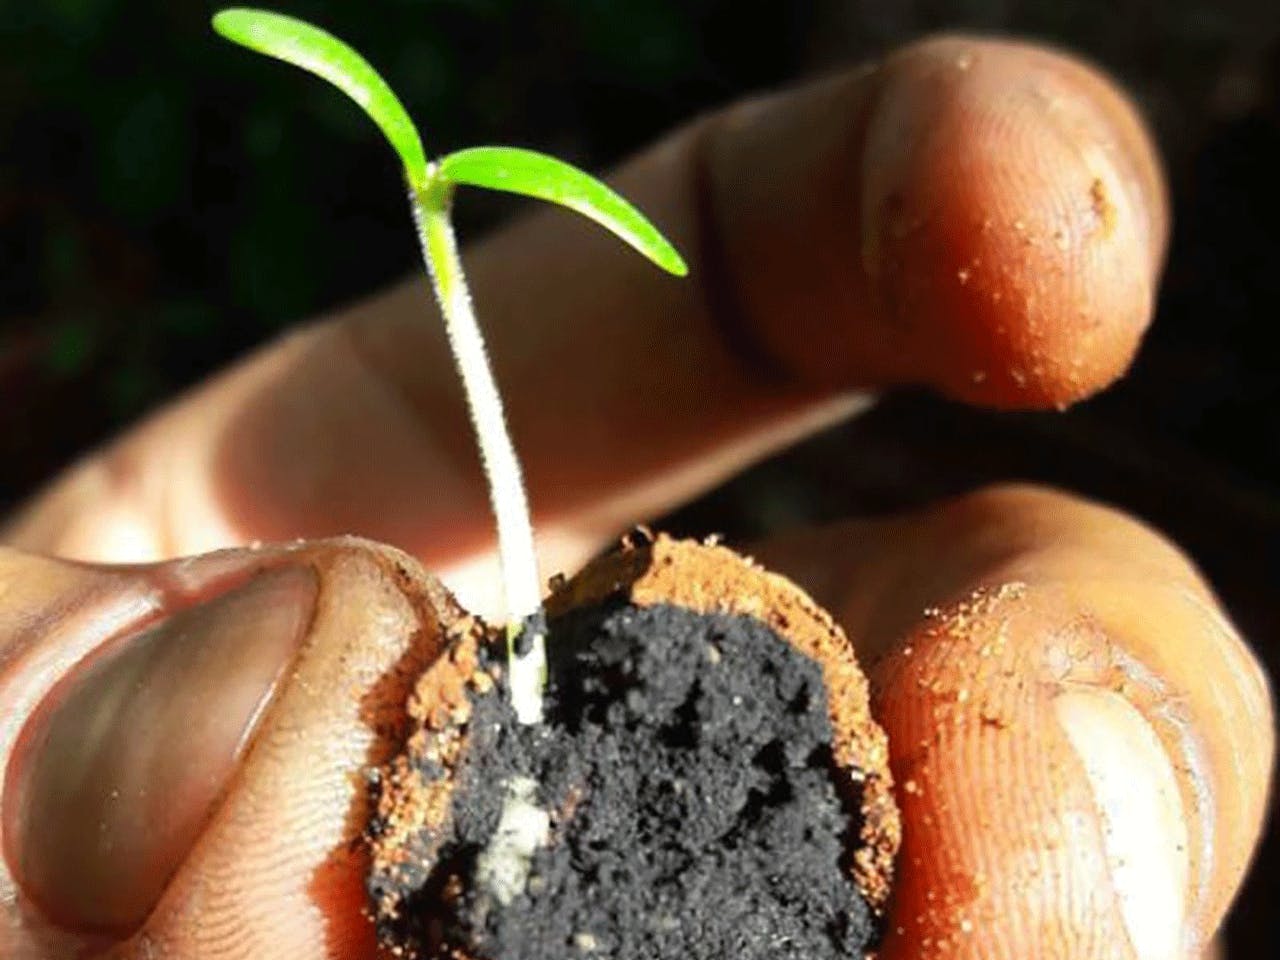 Reforesting Kenya From the Sky with Seedballs